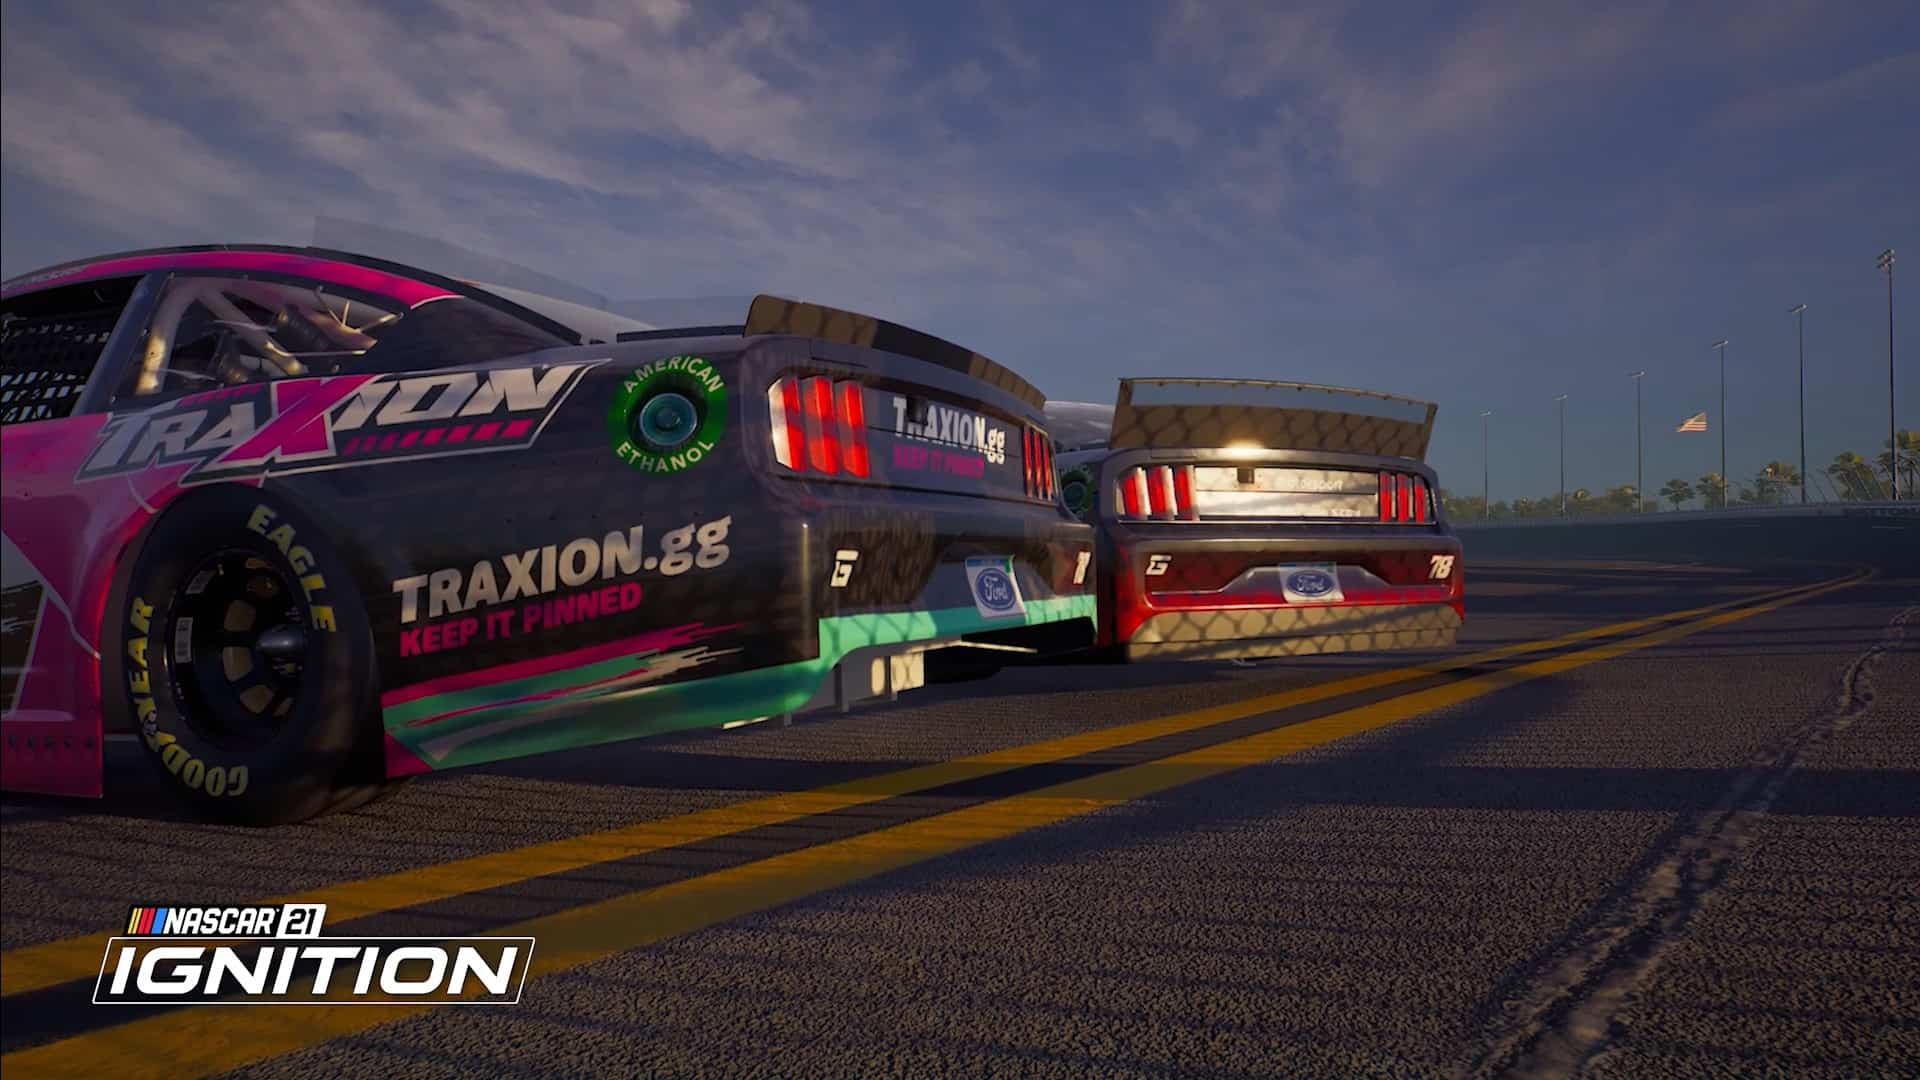 NASCAR 21: Ignition 'Dev Diary' #1 provides deeper game details